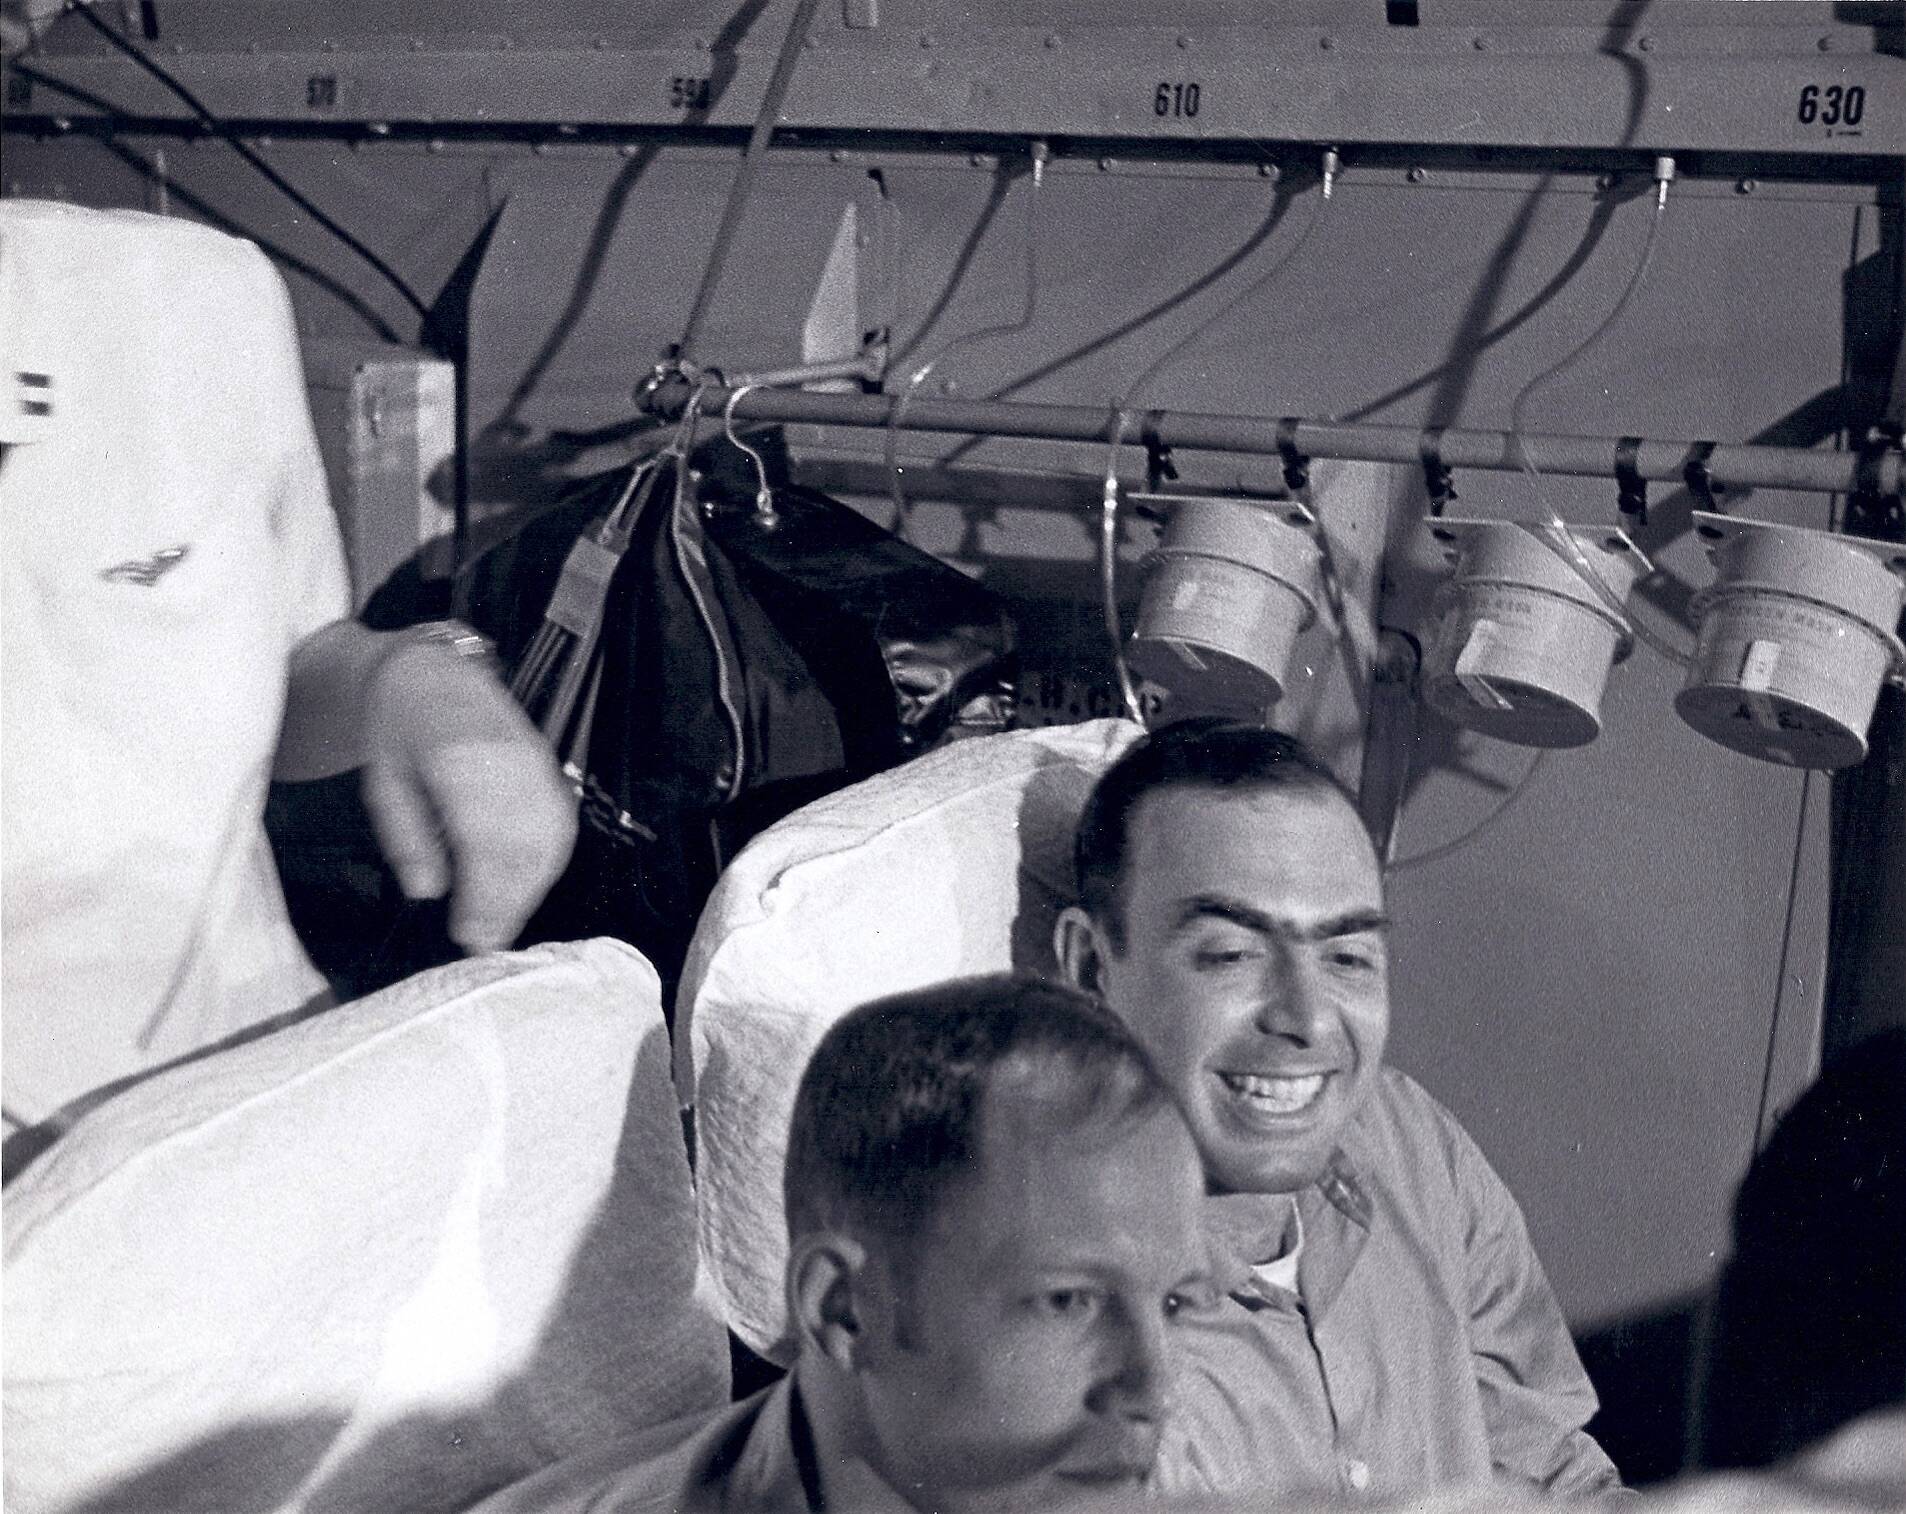 Photo provided
Major Joe Crecca, right, is flown out of Hanoi in February 1973 after spending six years as a prisoner of war.